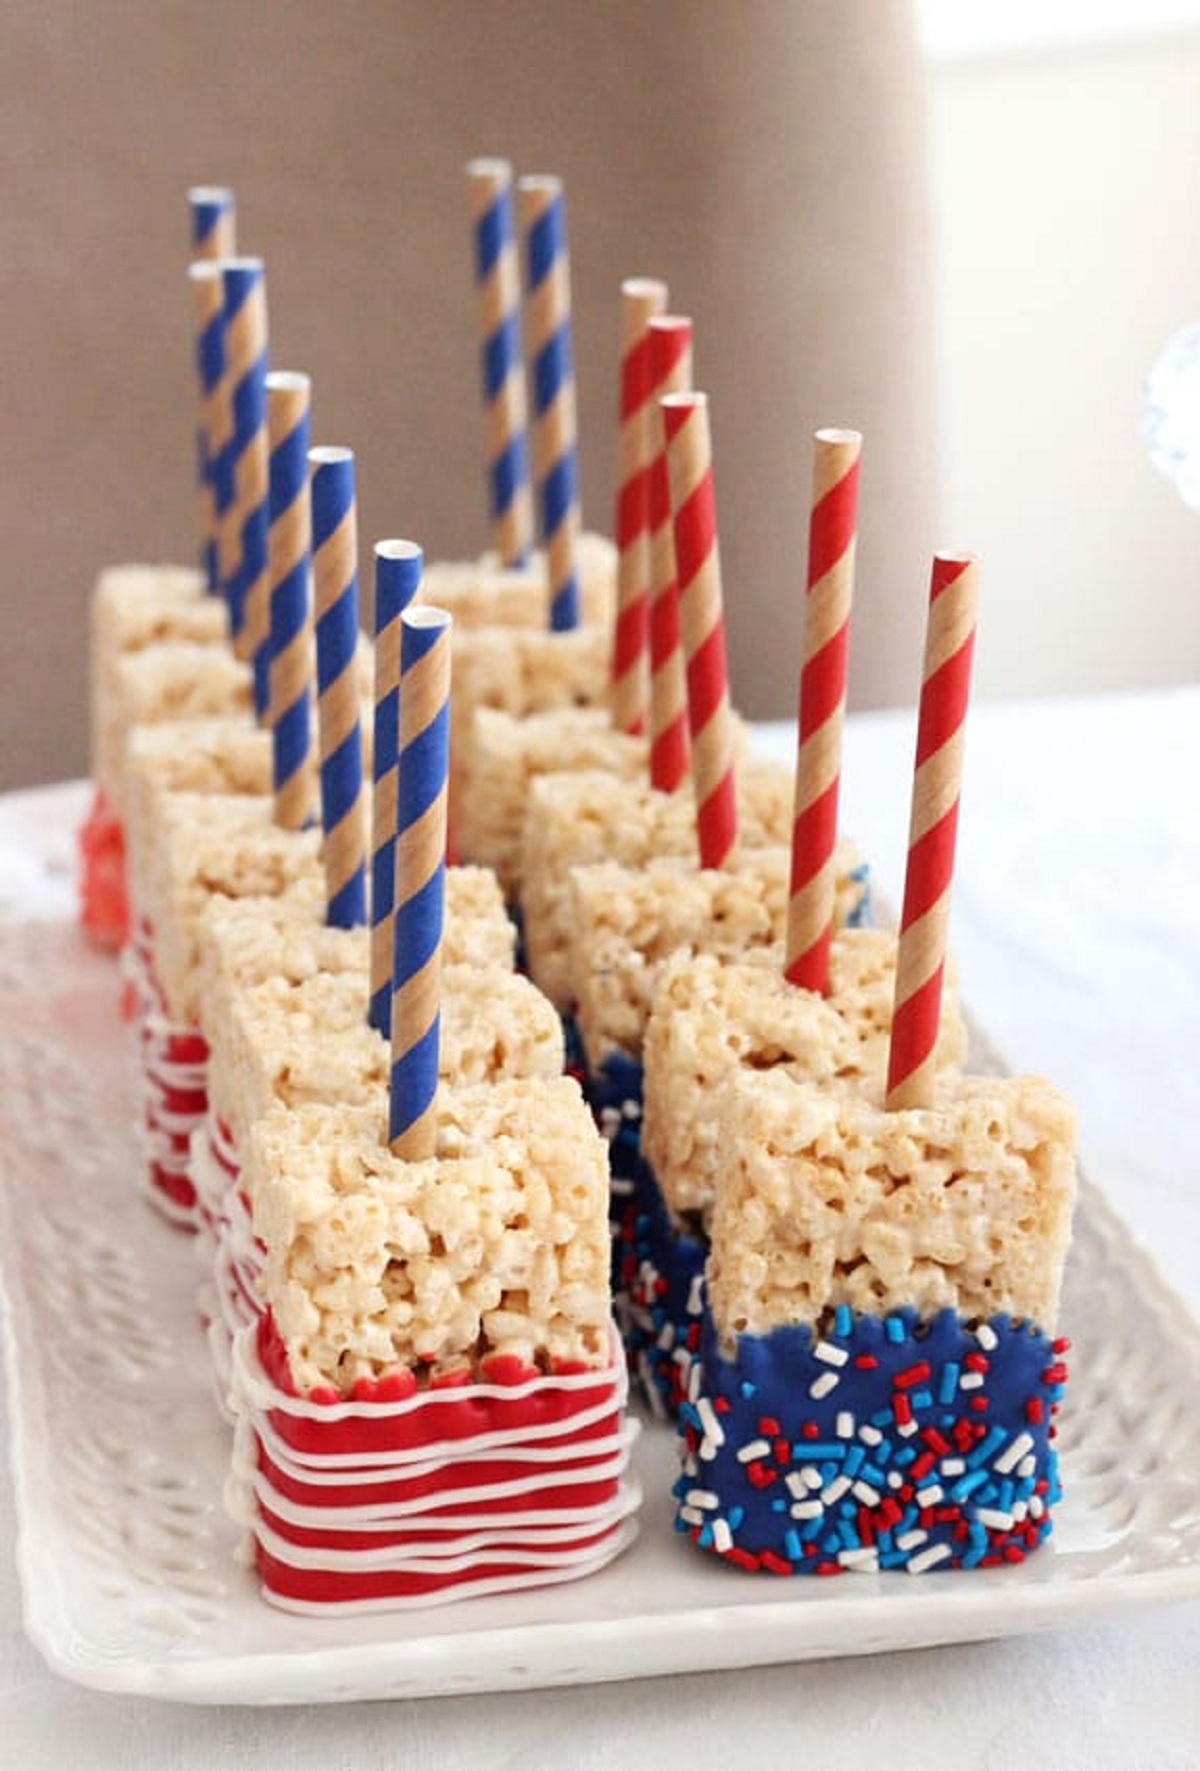 Squares of rice krispie treats dipped in red and blue chocolate with sprinkles and paper straws on top